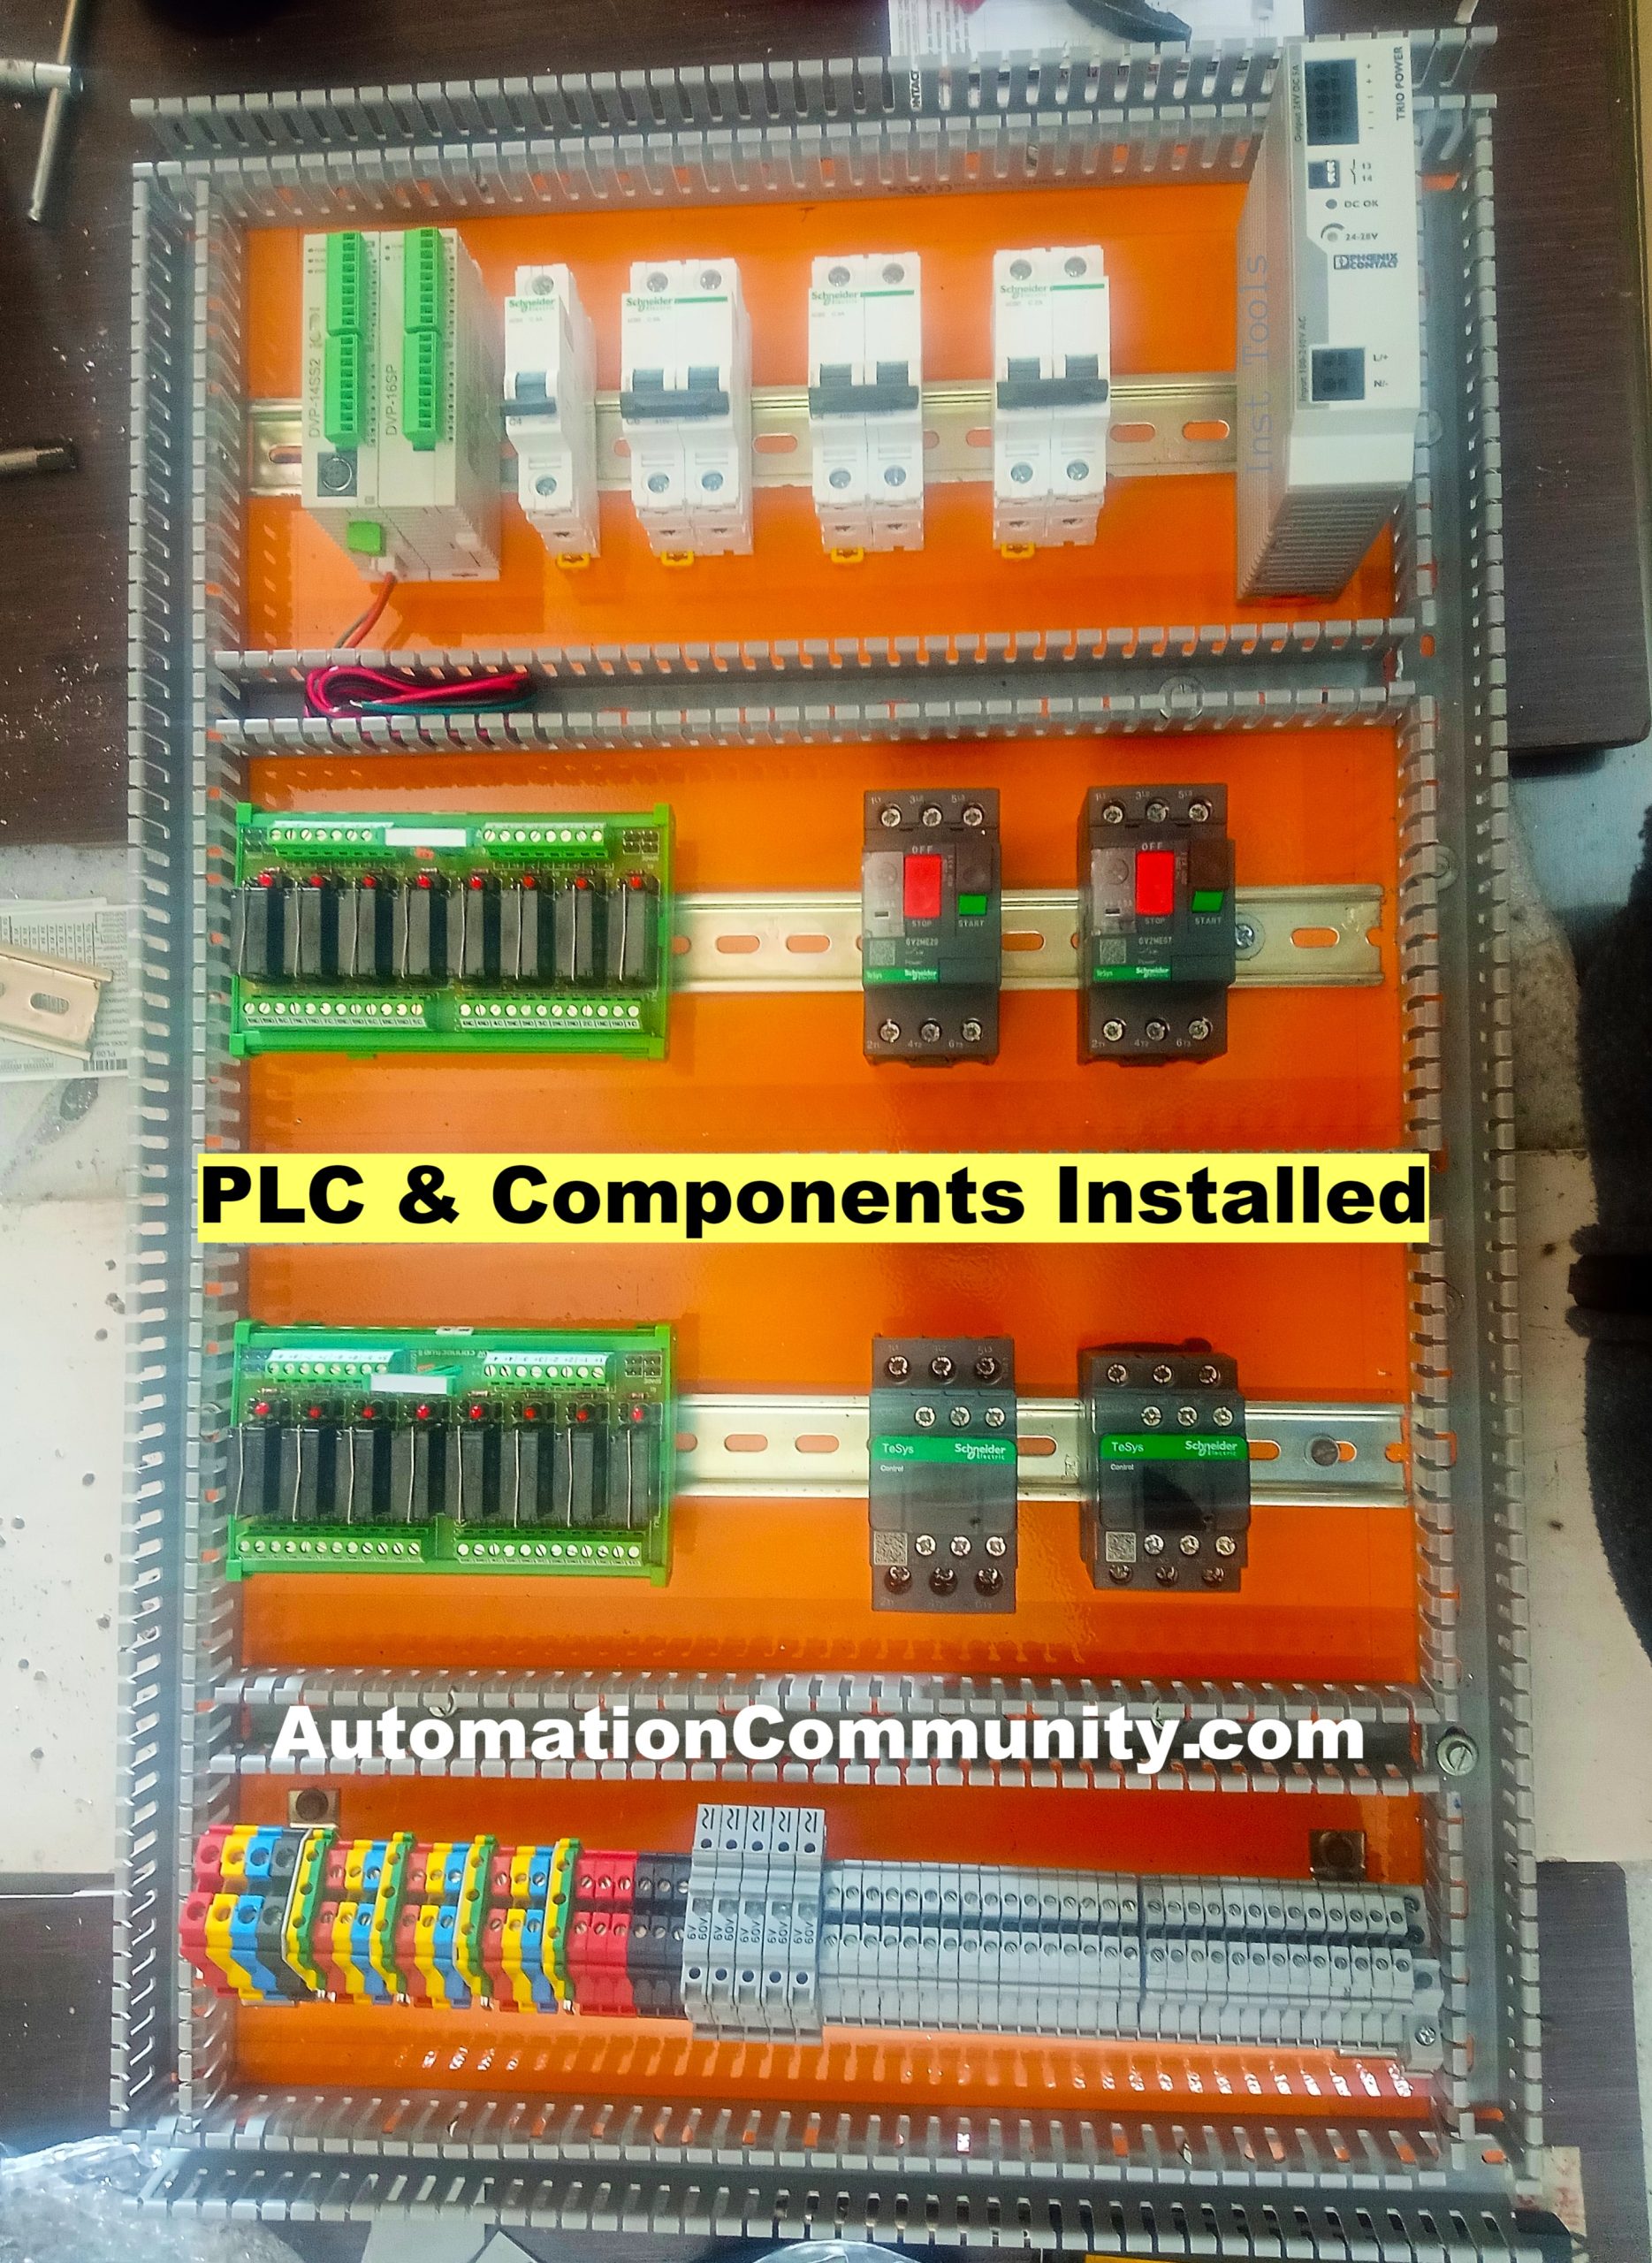 Mount PLC and other Components